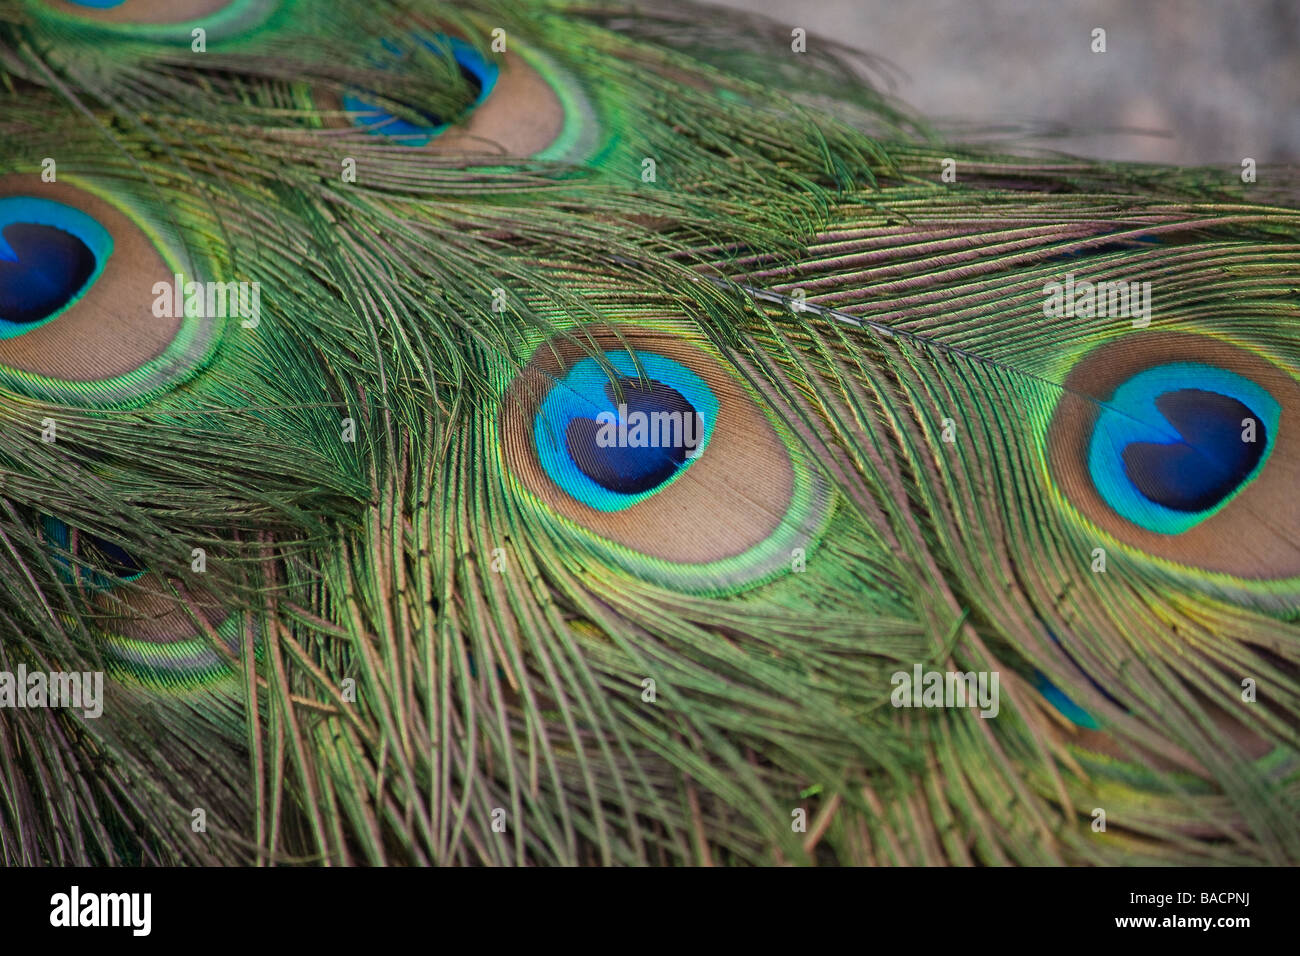 Up-close peacock feather Stock Photo - Alamy